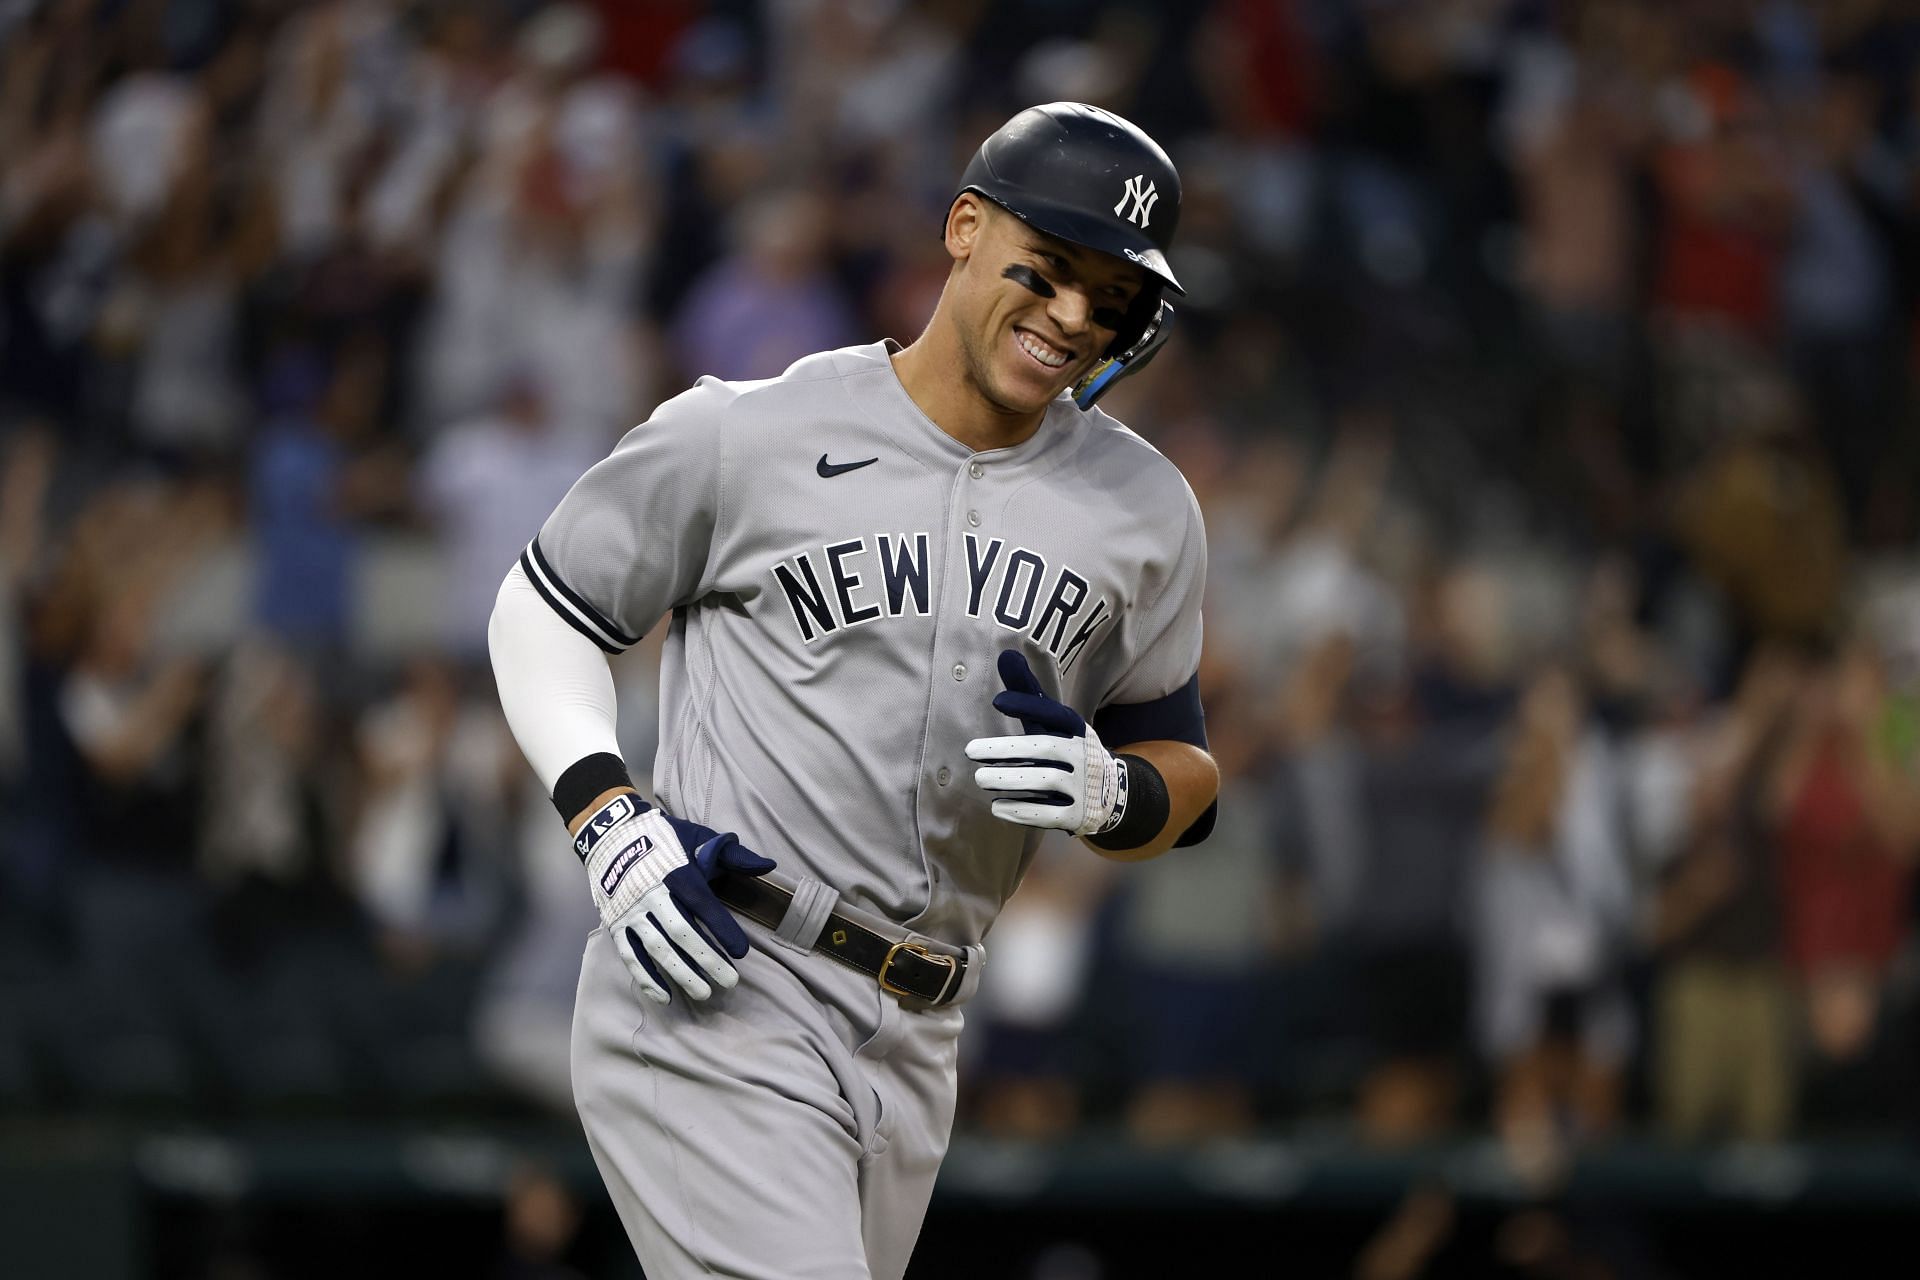 fans react to Yankees superstar Aaron Judge being an MVP finalist for 2nd time in 6 seasons